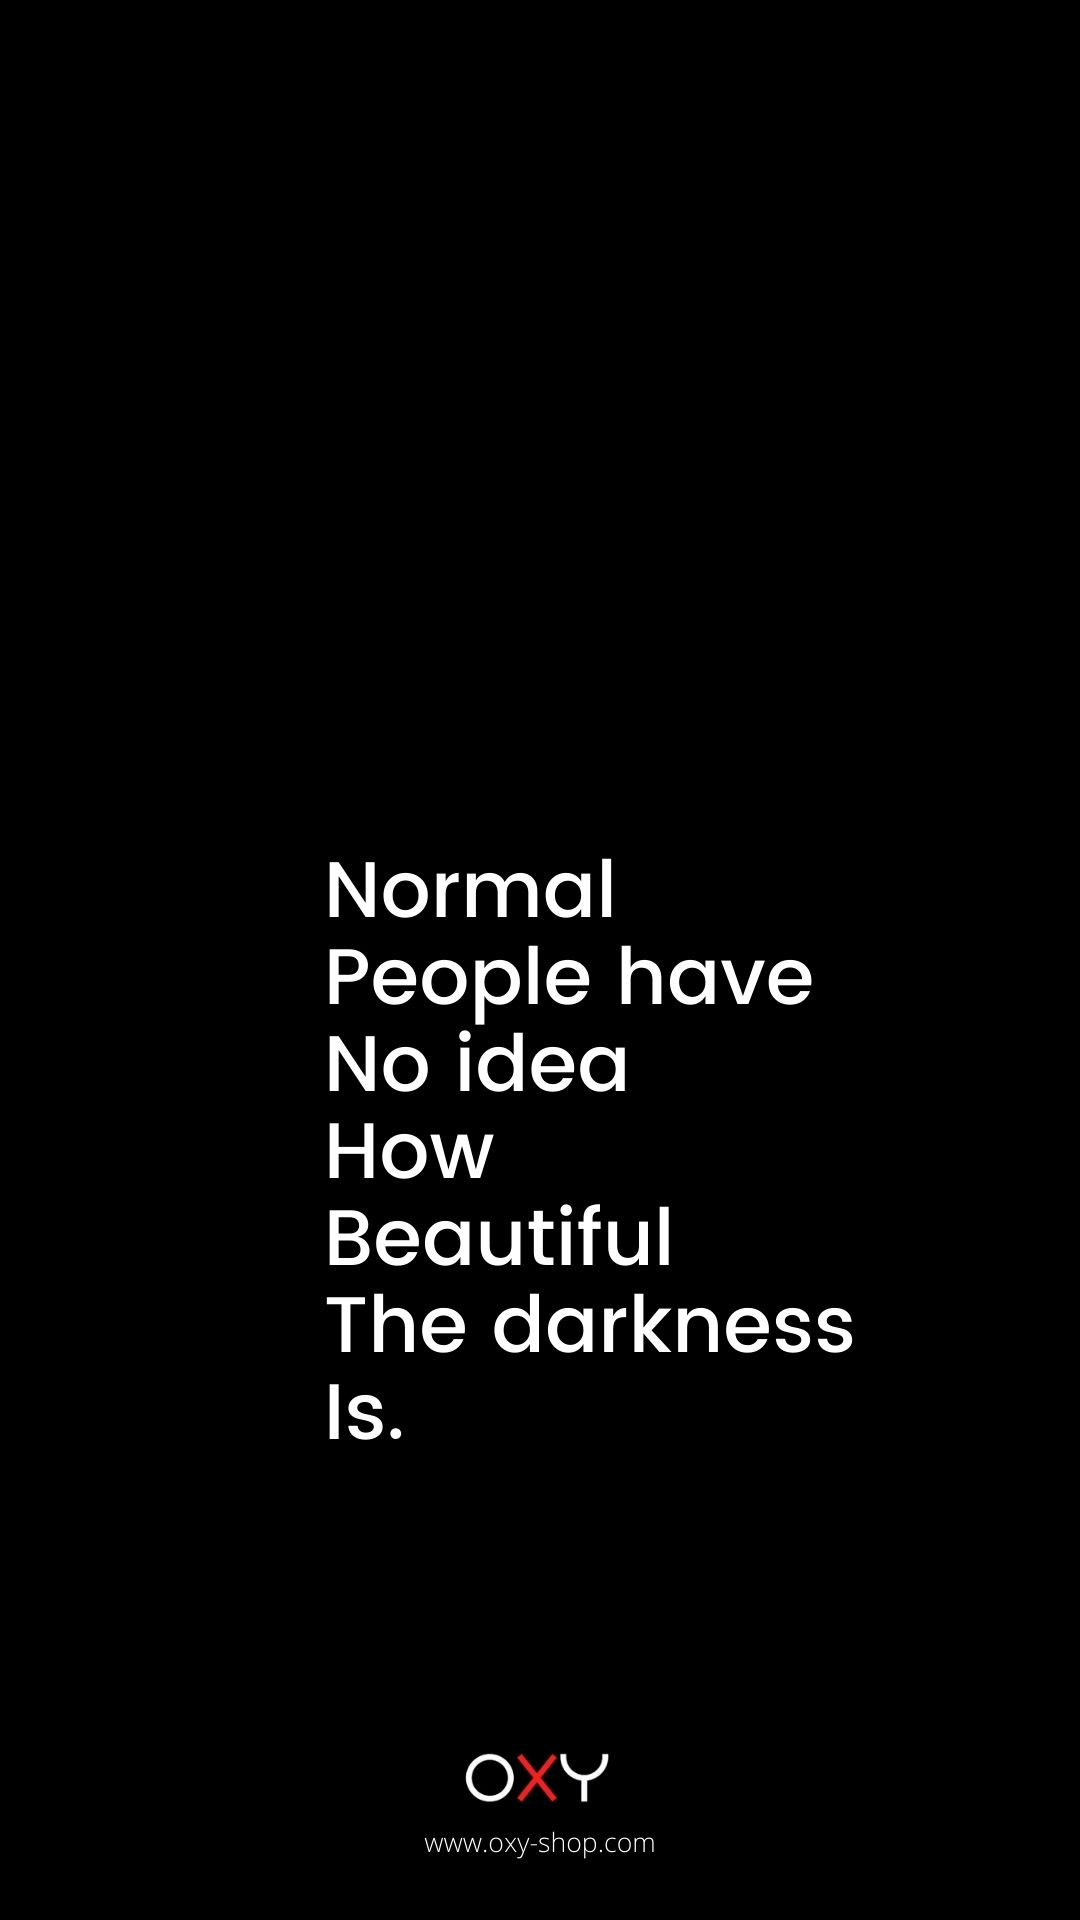 Normal people have no idea how beautiful the darkness is. - BDSM wallpaper